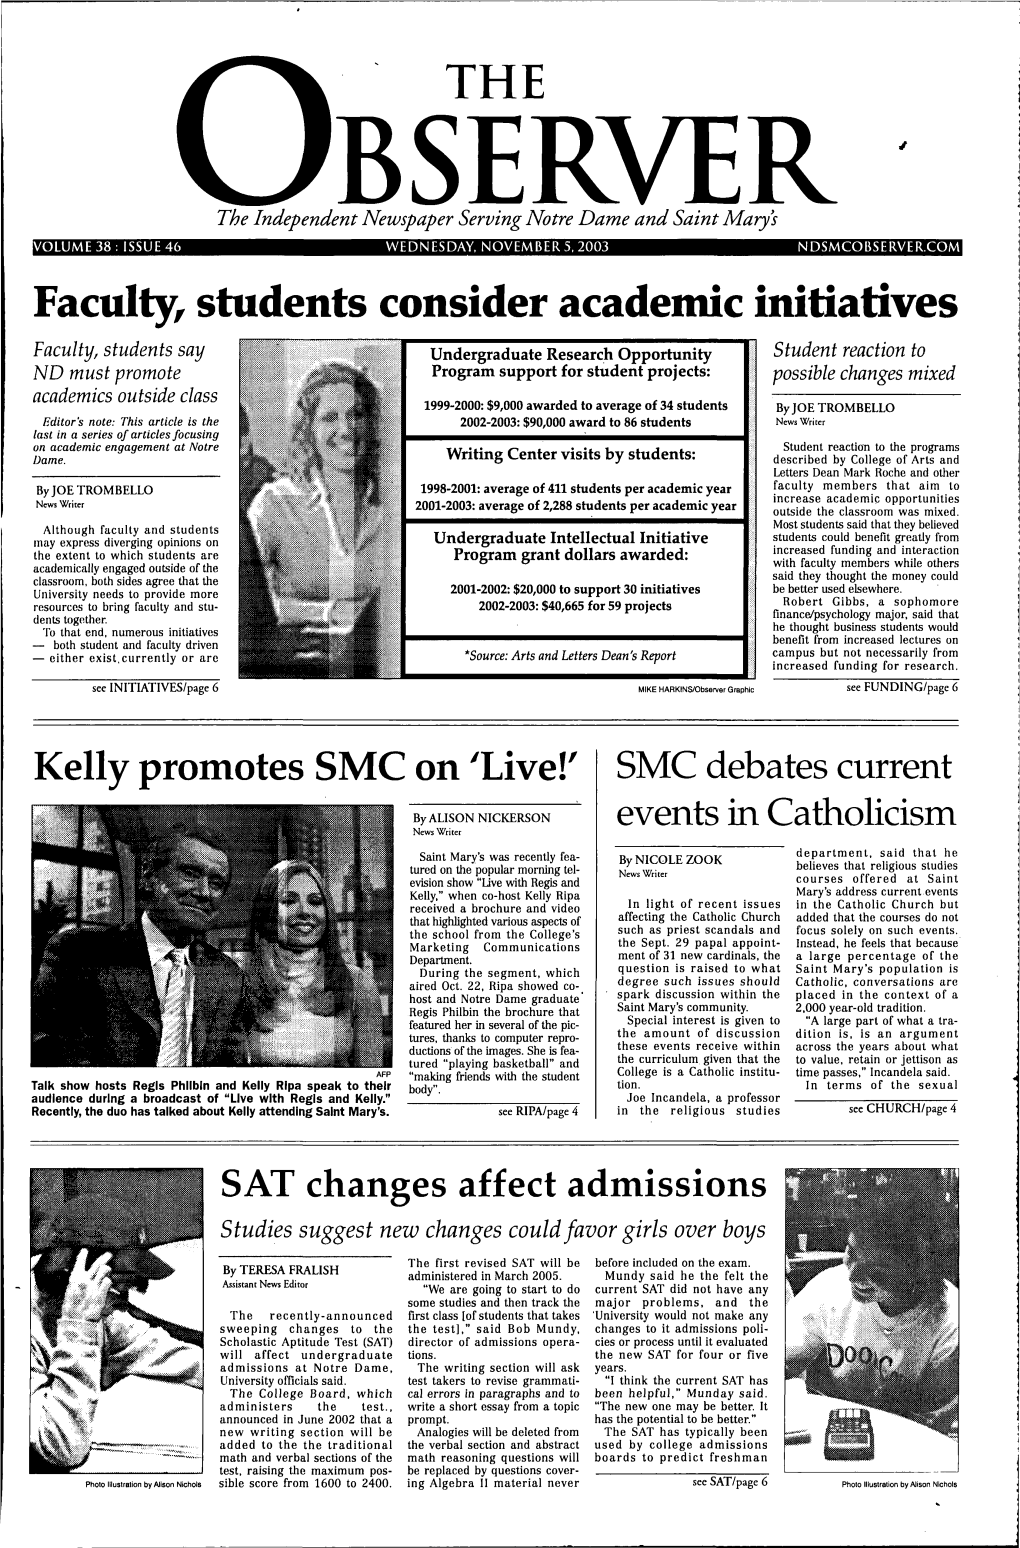 Faculty, Students Consider Academic Initiatives